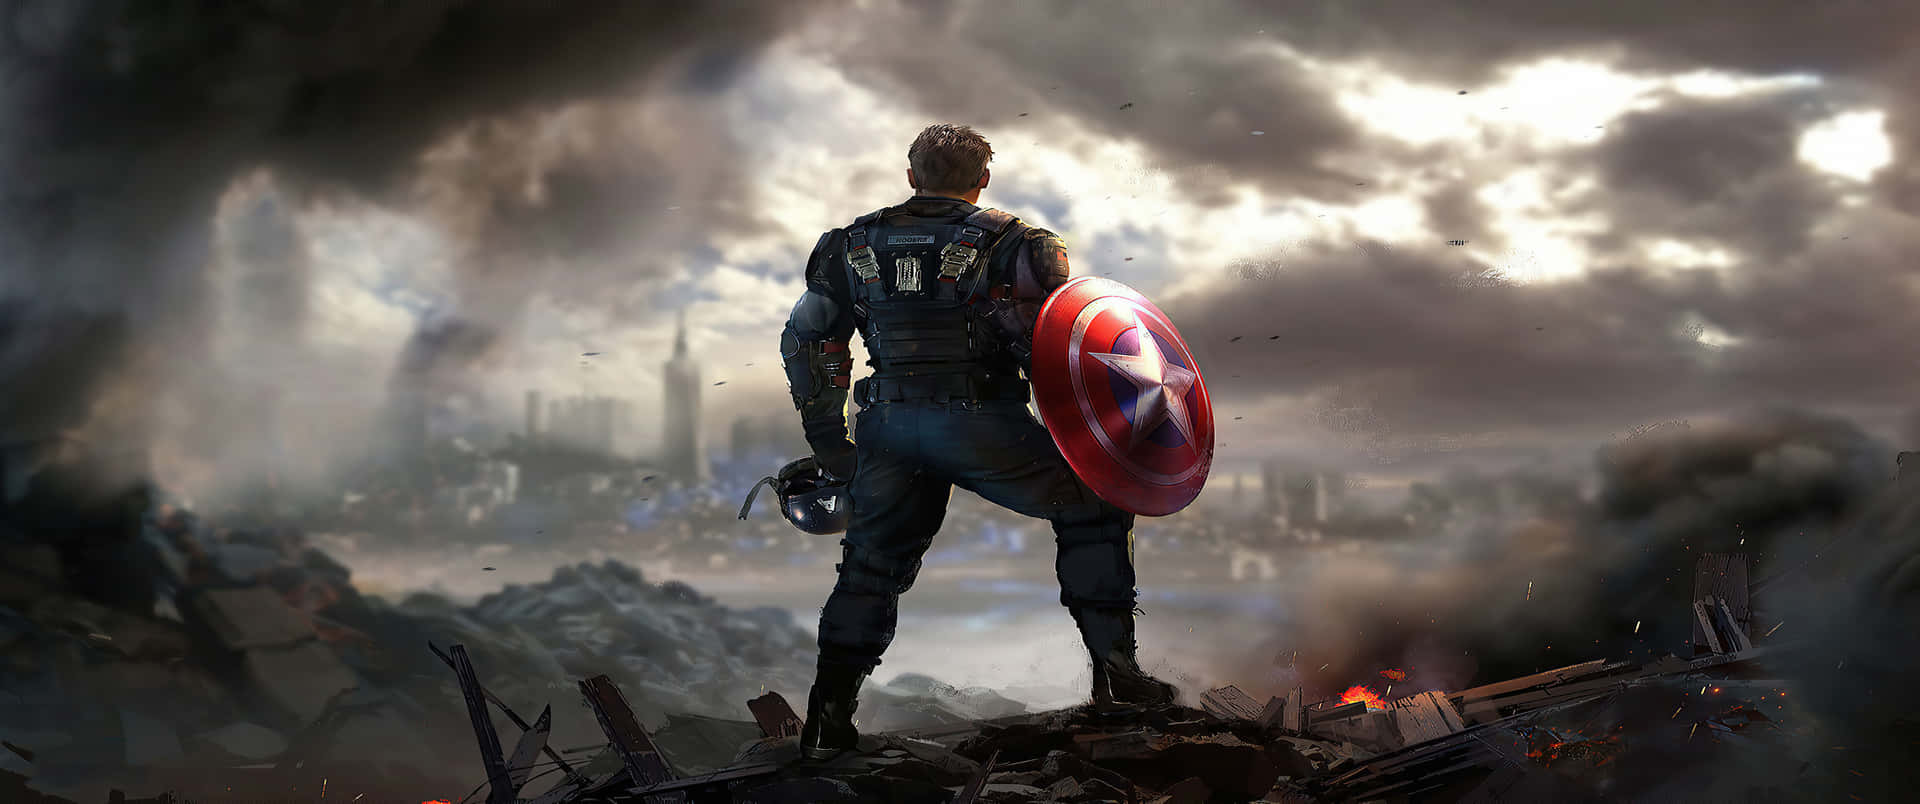 Captain America On Chaotic City Marvel 3440x1440 Background